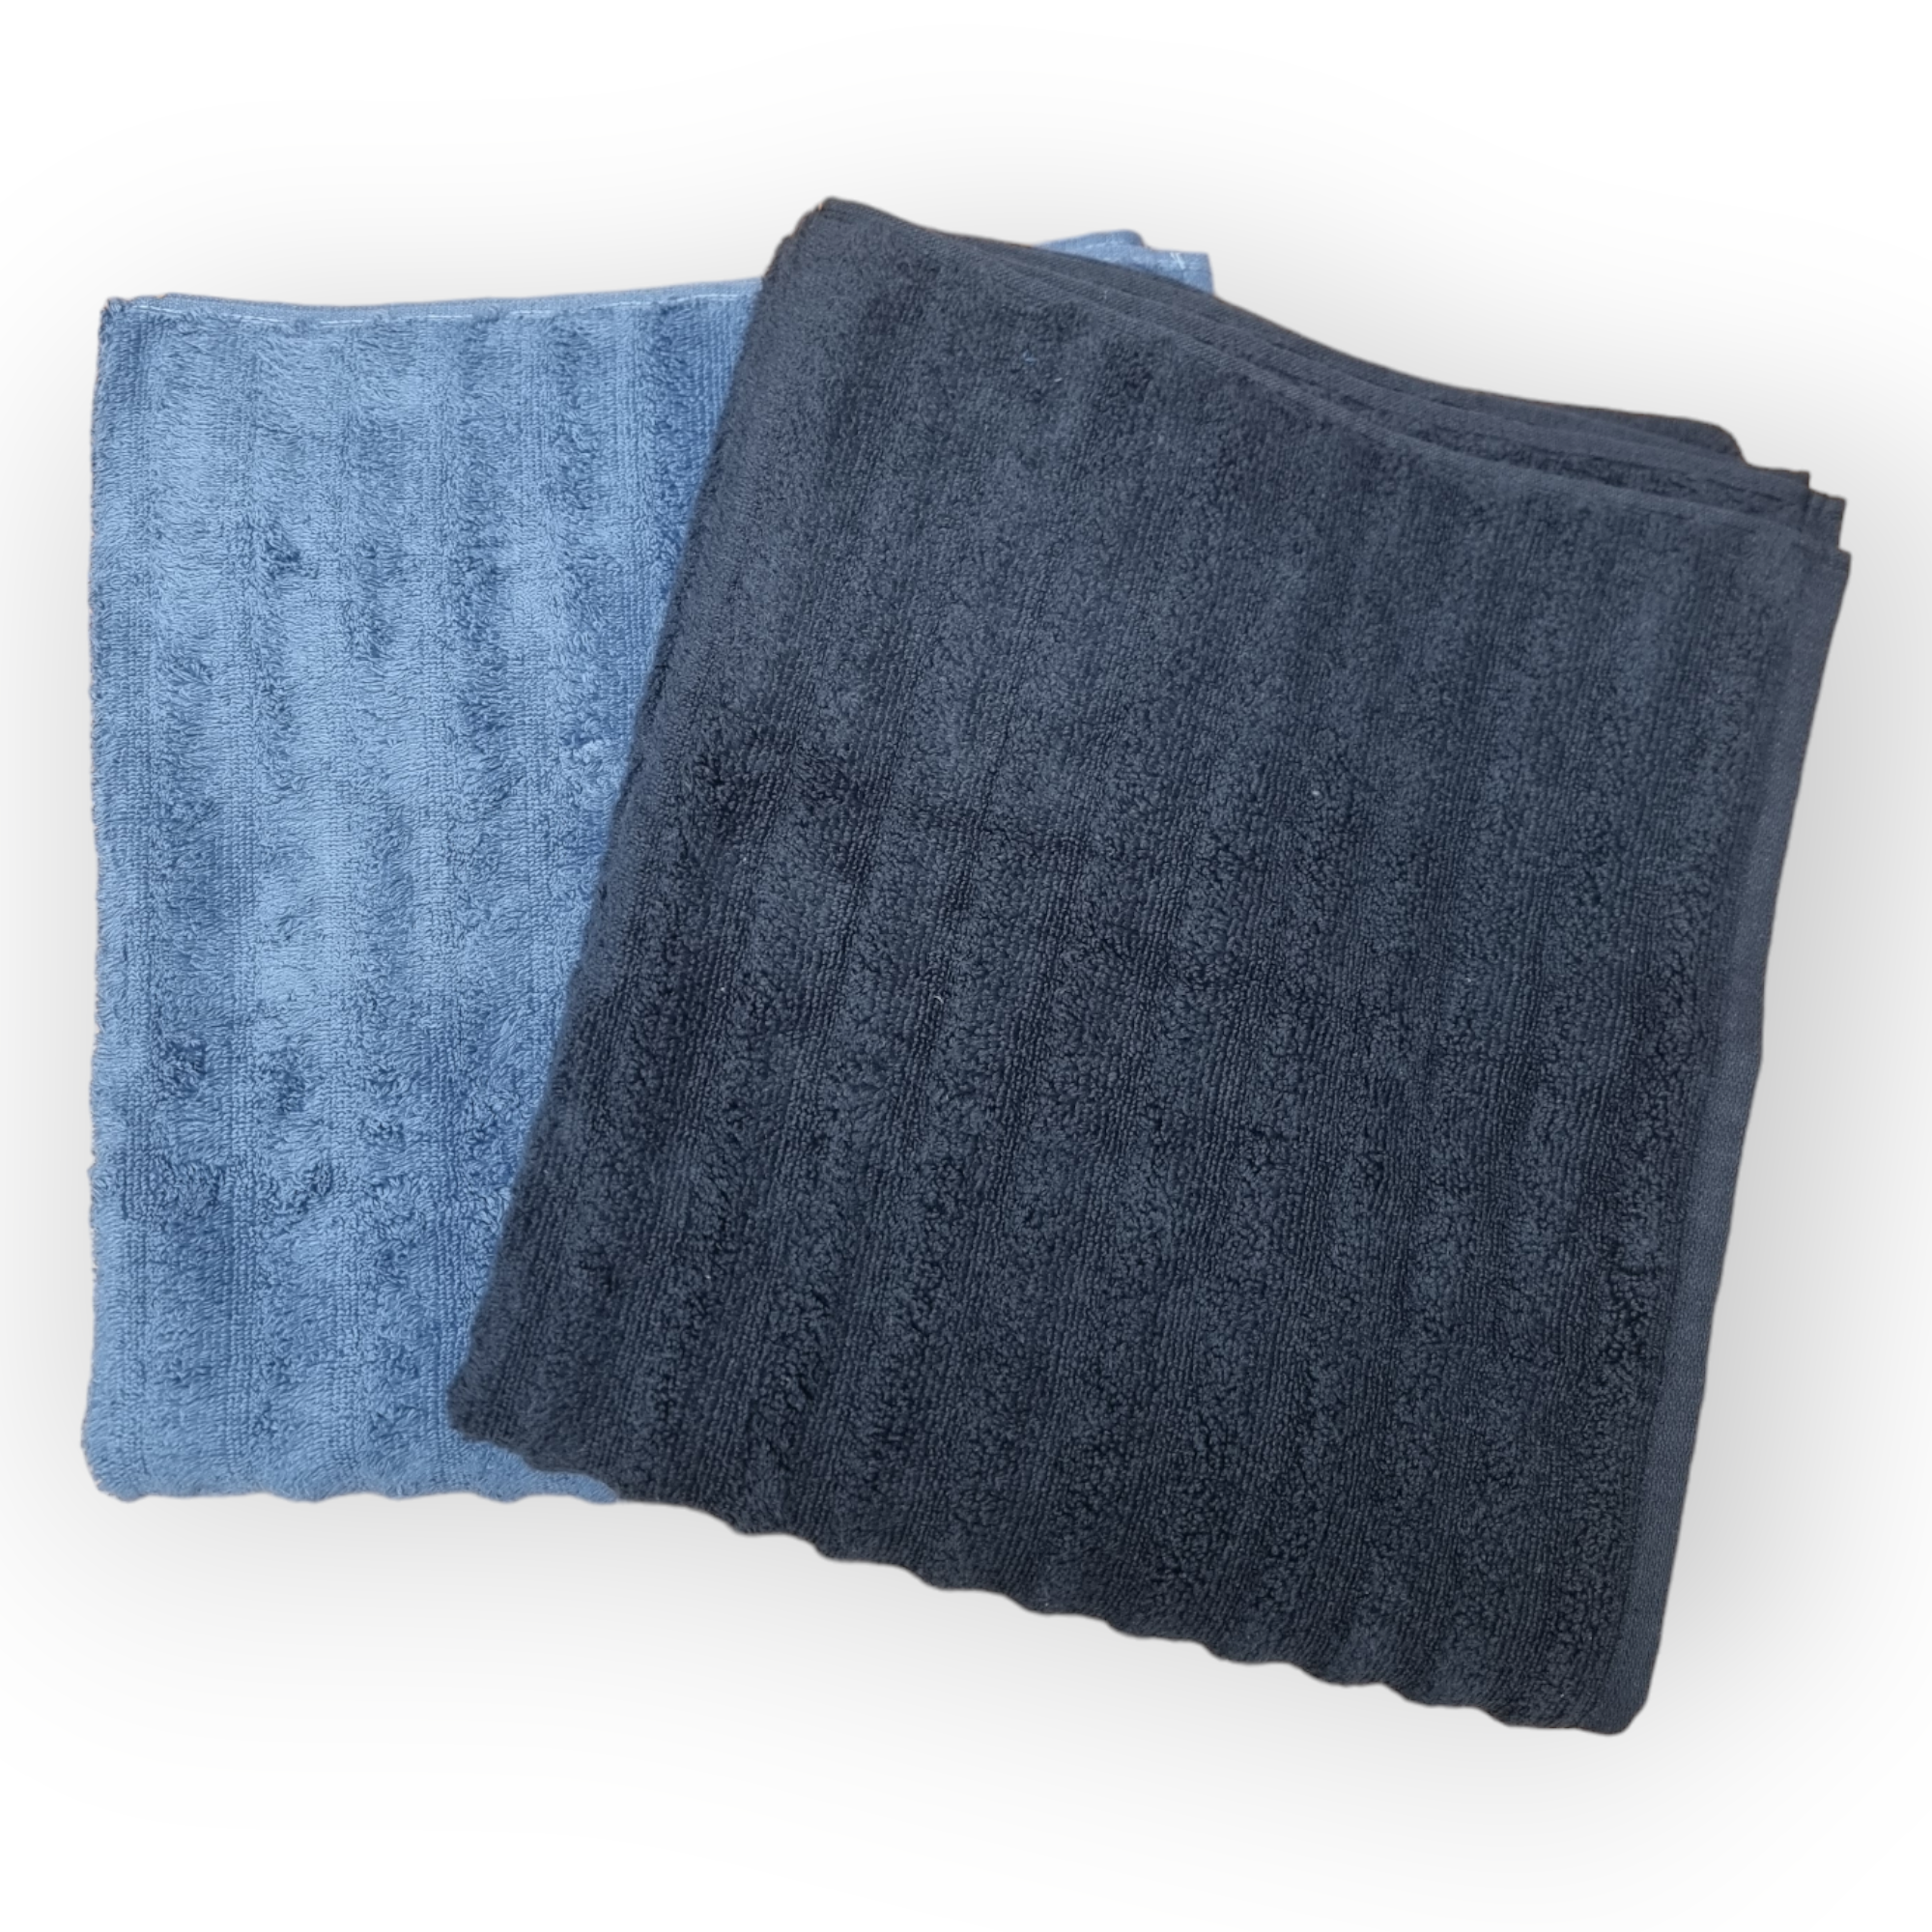 MicroCotton Luxury Thick Soft Ribbed Bath Towels